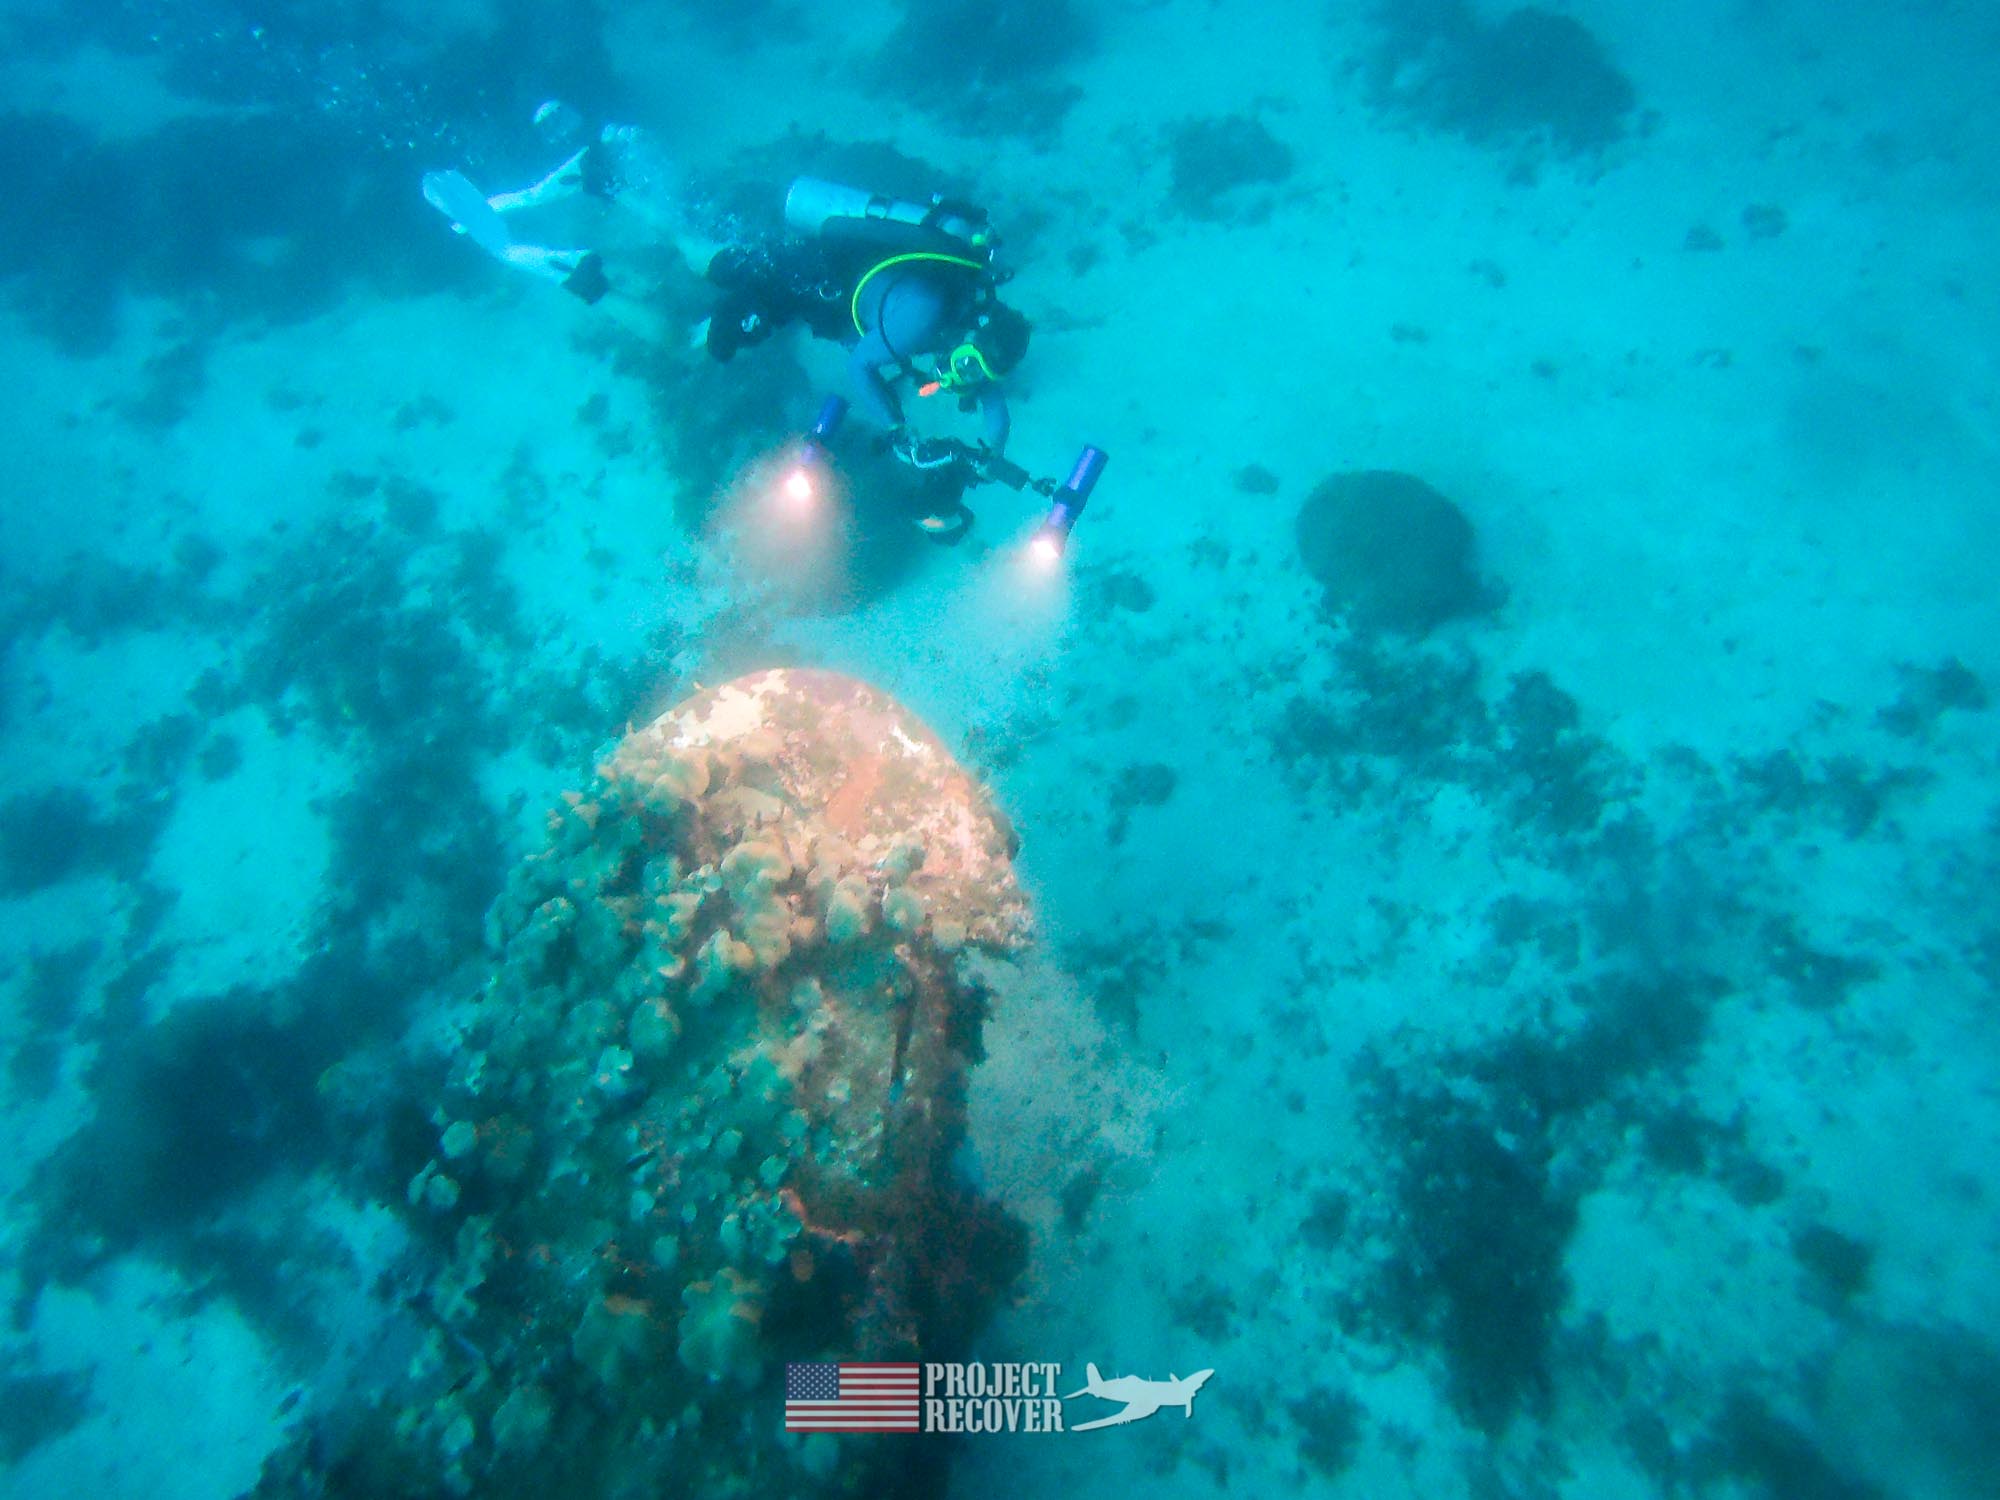 Harry Parker filming for a 3D model of the WWII aircraft Wreck in the Solomon islands while scuba diving mia crash sites. Project Recover and BentProp Project are committed to bringing the MIA home. Photo by Charlie Brown